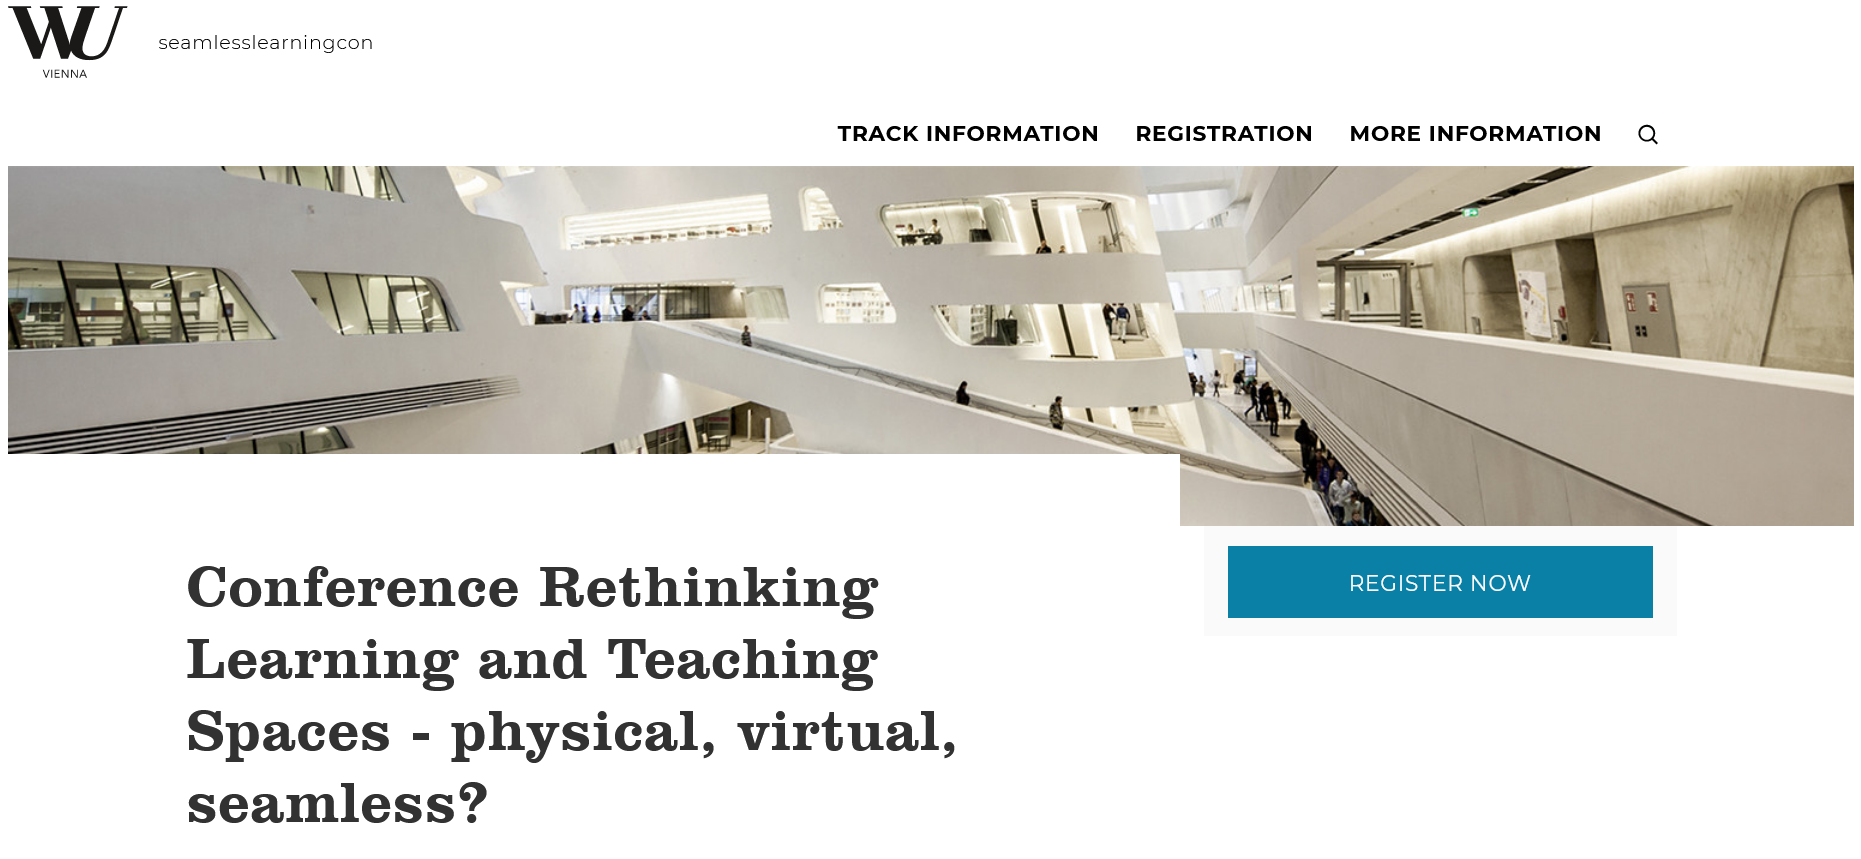 Rethinking Learning and Teaching Spaces - physical, virtual, seamless?